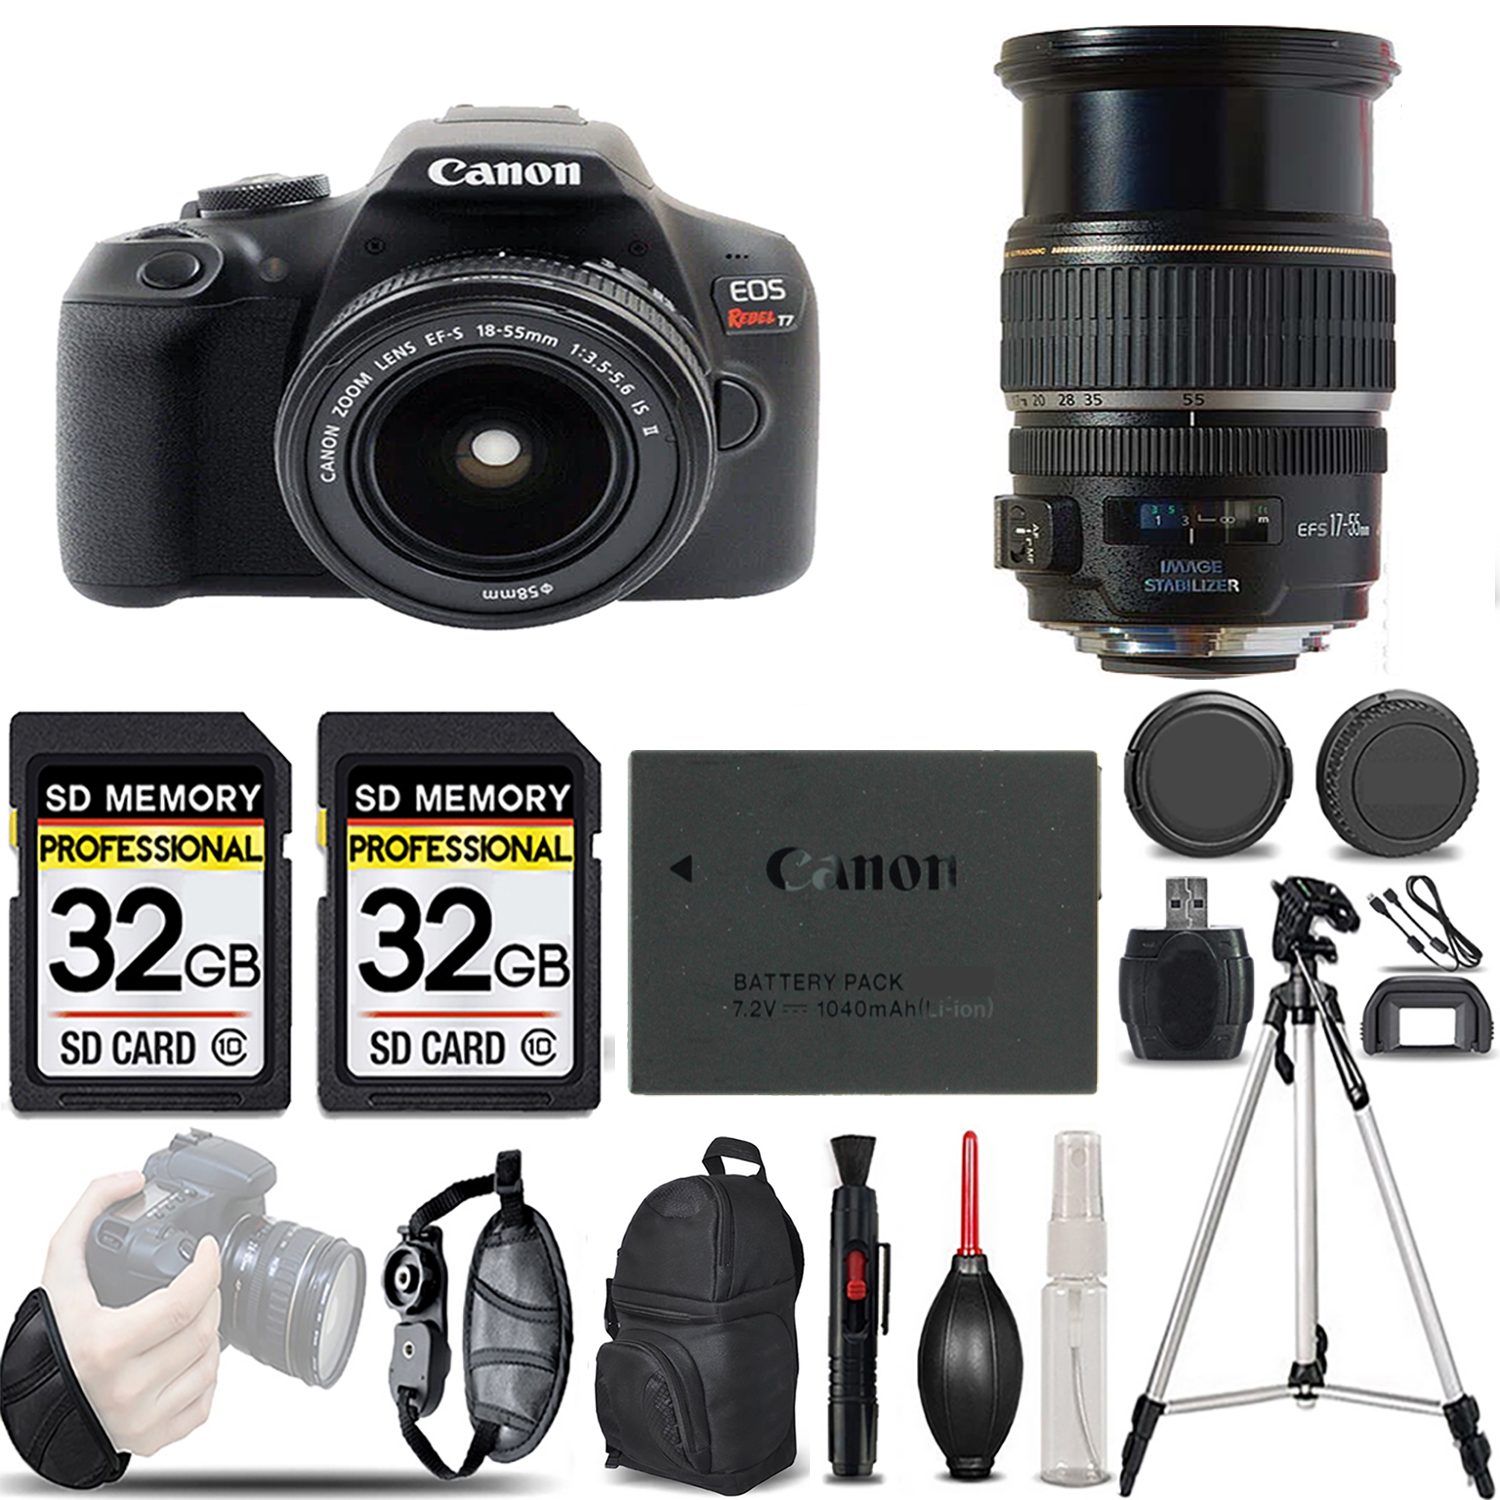 EOS Rebel T7 with 18-55mm Lens + 17-55mm f/2.8 IS USM Lens - LOADED KIT *FREE SHIPPING*